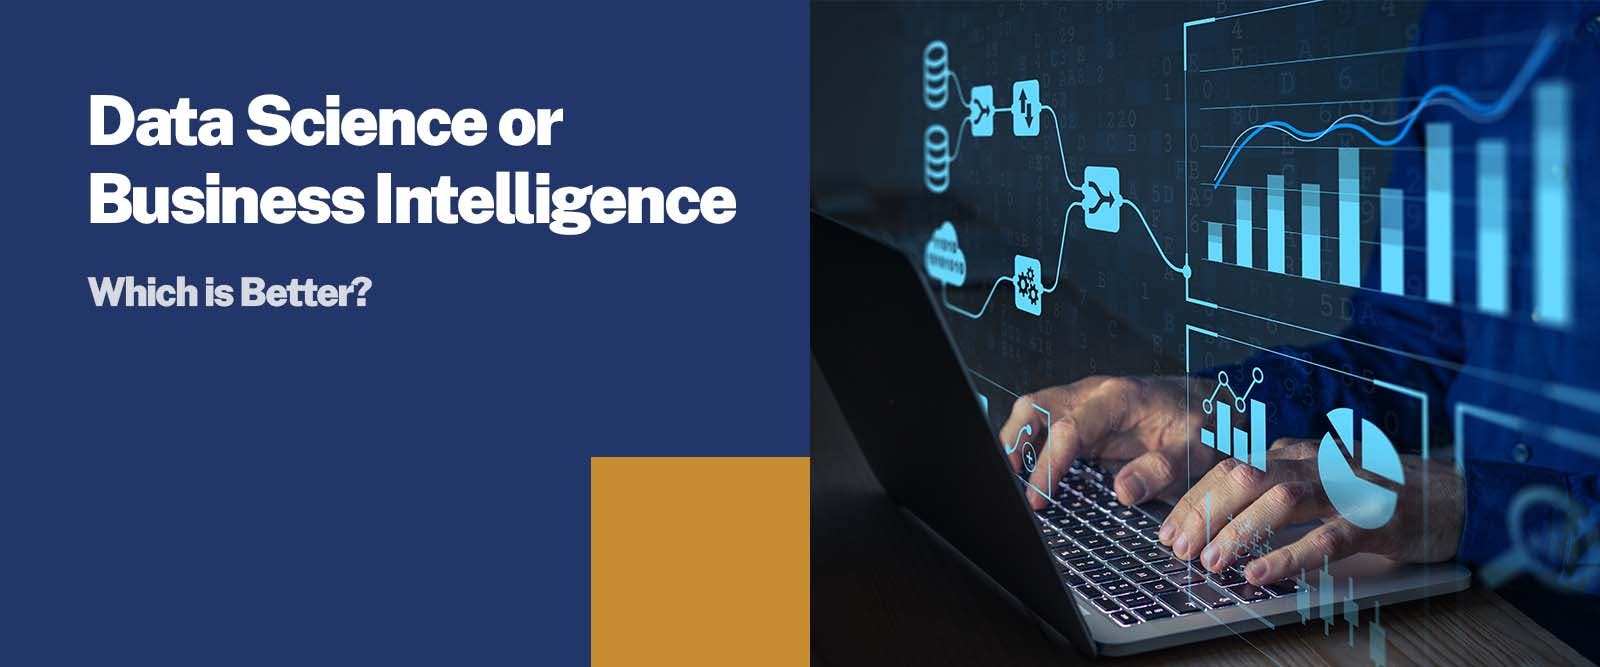 Which is Better - Data Science or Business Intelligence